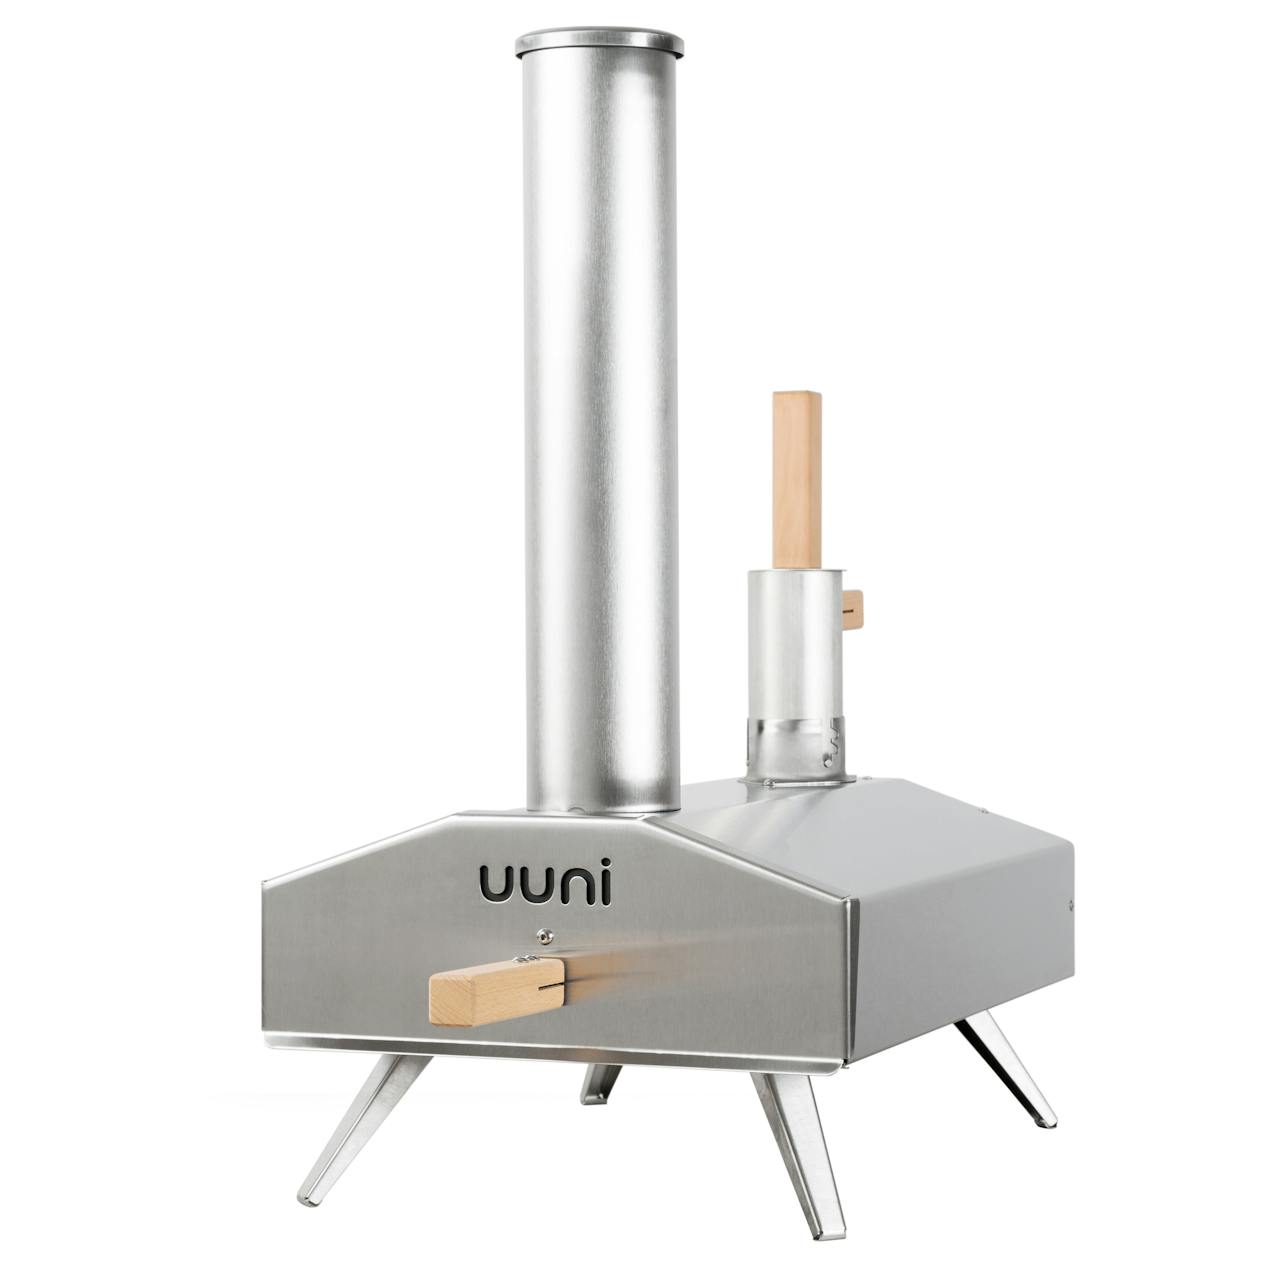 Ooni Uuni 2S Wood-Fired Oven with Stone Baking Board